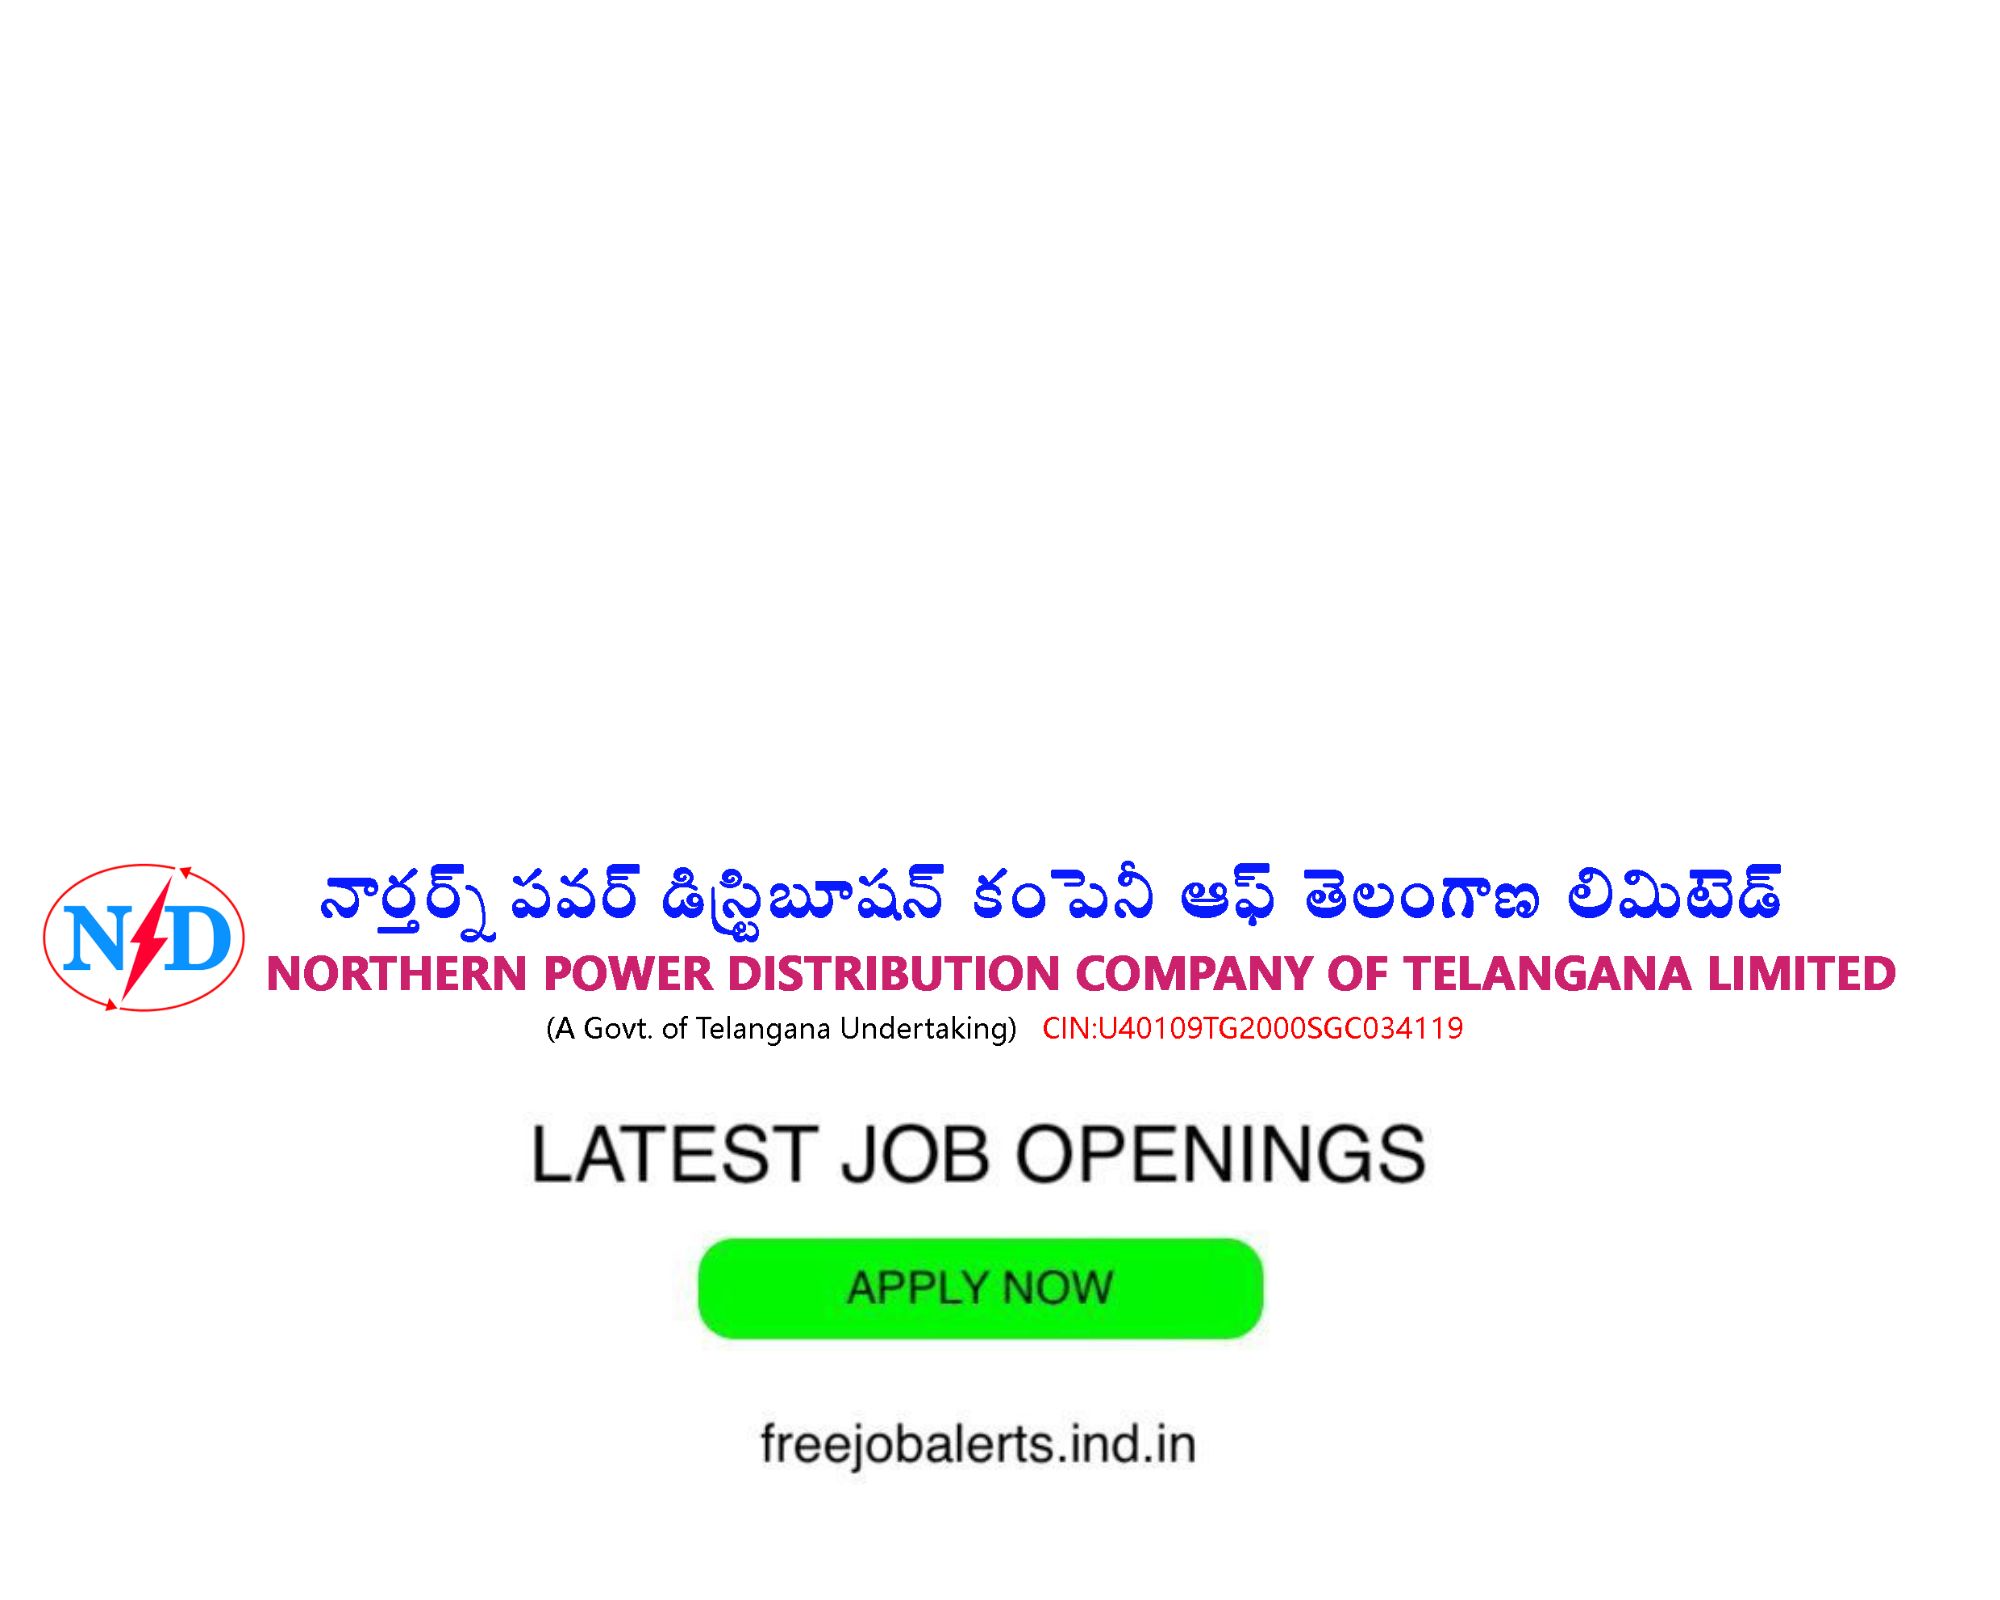 Northern Power Distribution Company of Telangana Limited- TSNPDCL - Latest Govt job openings - Free job alerts, Indian Govt Jobs